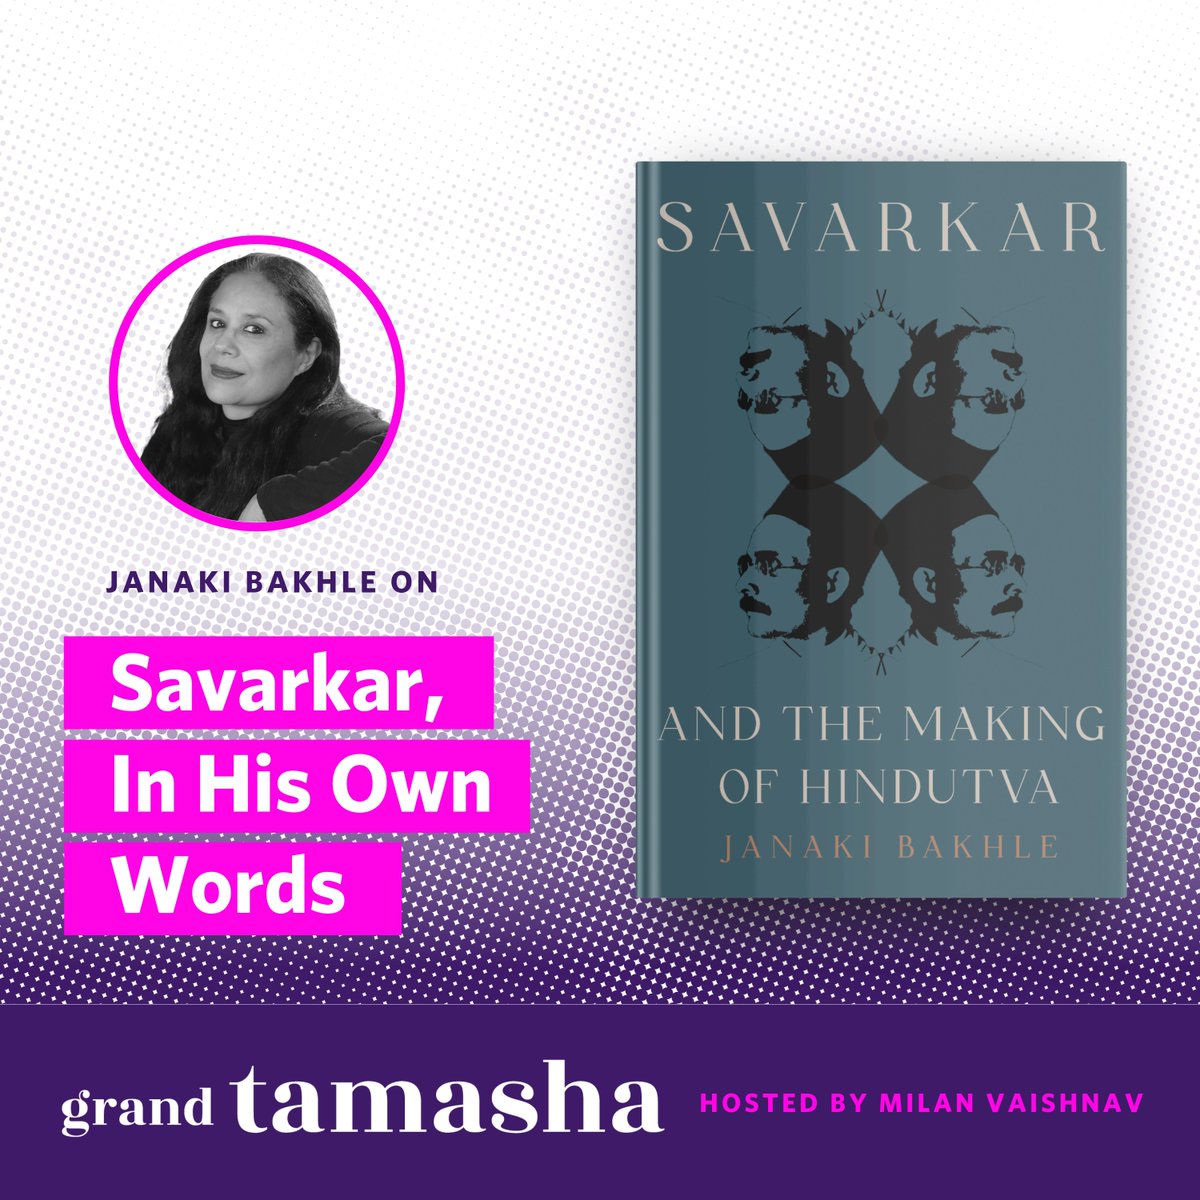 Listen to Savarkar and the Making of Hindutva author Janaki Bahkle discuss the life, ideas, and writings of the pivotal figure of Hindu nationalism on the #GrandTamasha podcast hosted by @MilanV: hubs.ly/Q02r2W2h0